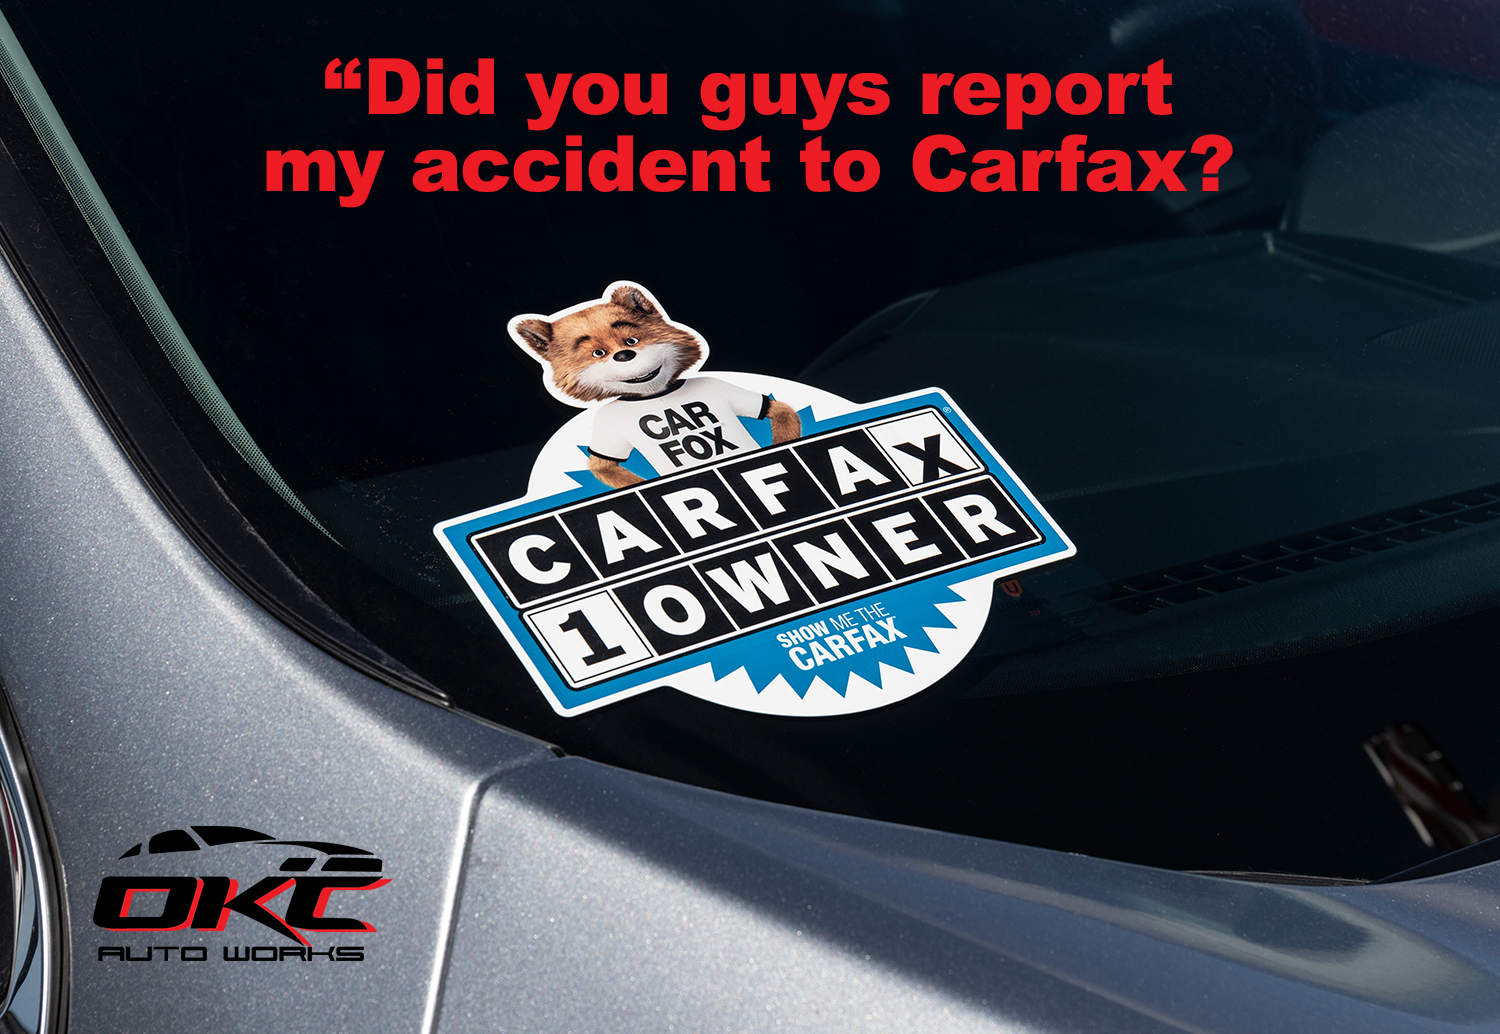 who reports to carfax?